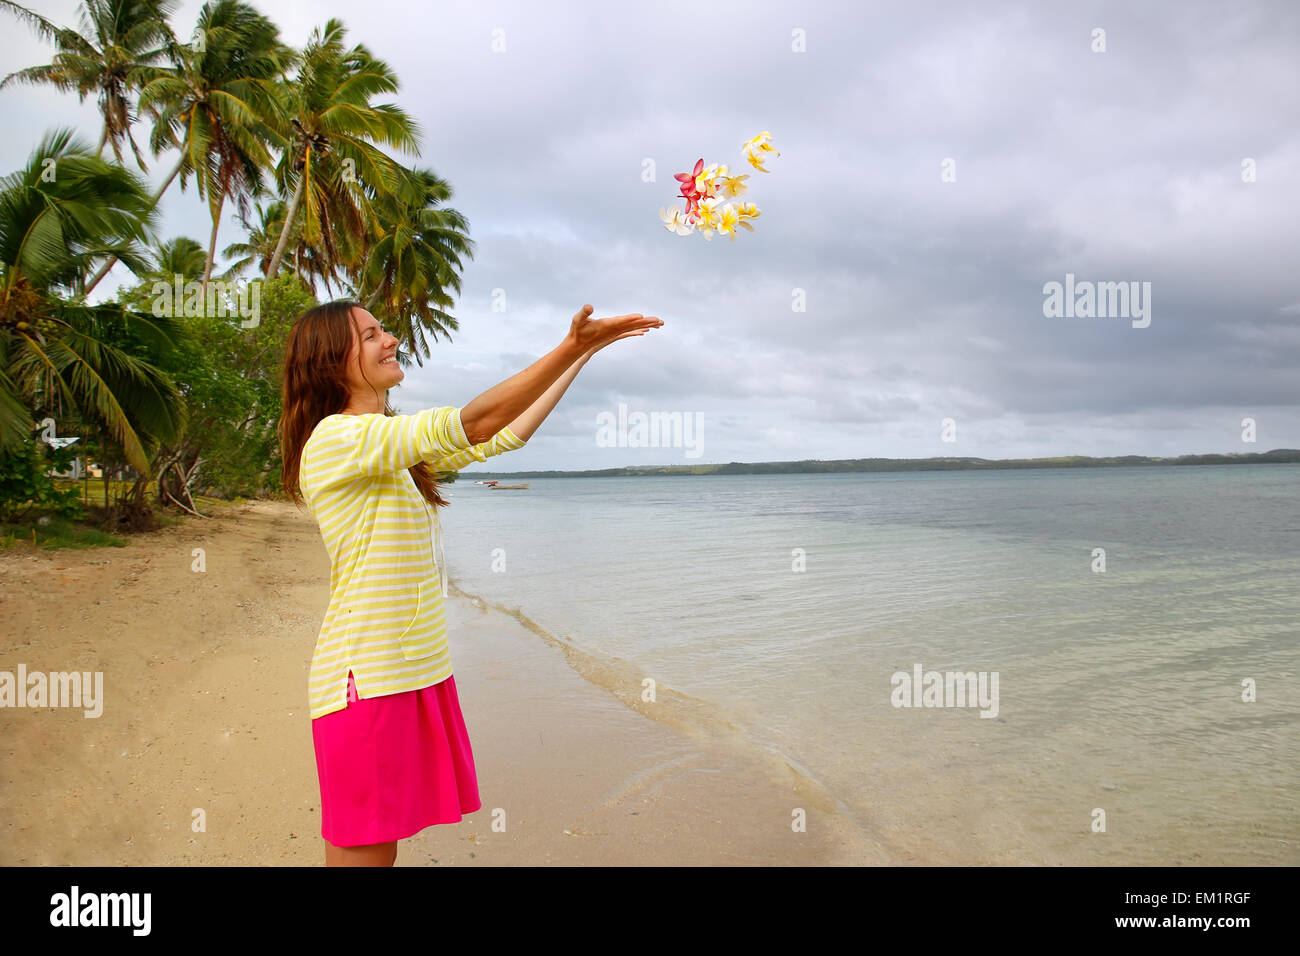 Young woman on a beach throwing flowers in the air, Ofu island, Tonga Stock Photo